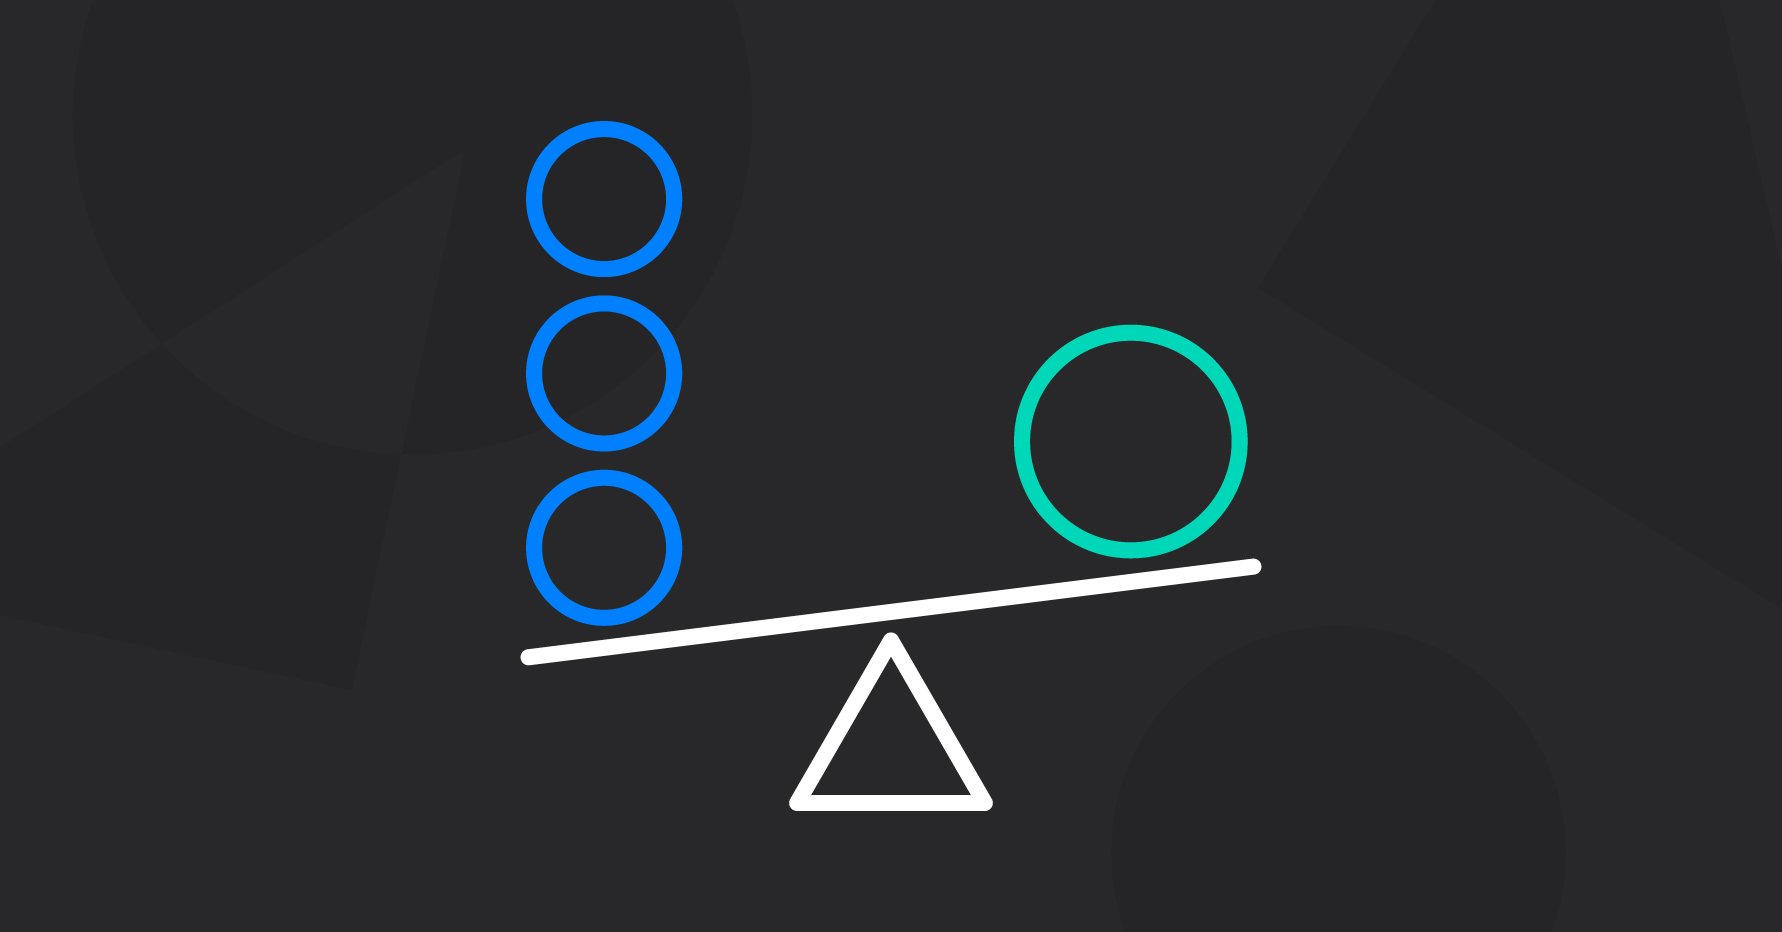 Stylistic illustration of a scale balancing three small circles and one large circle